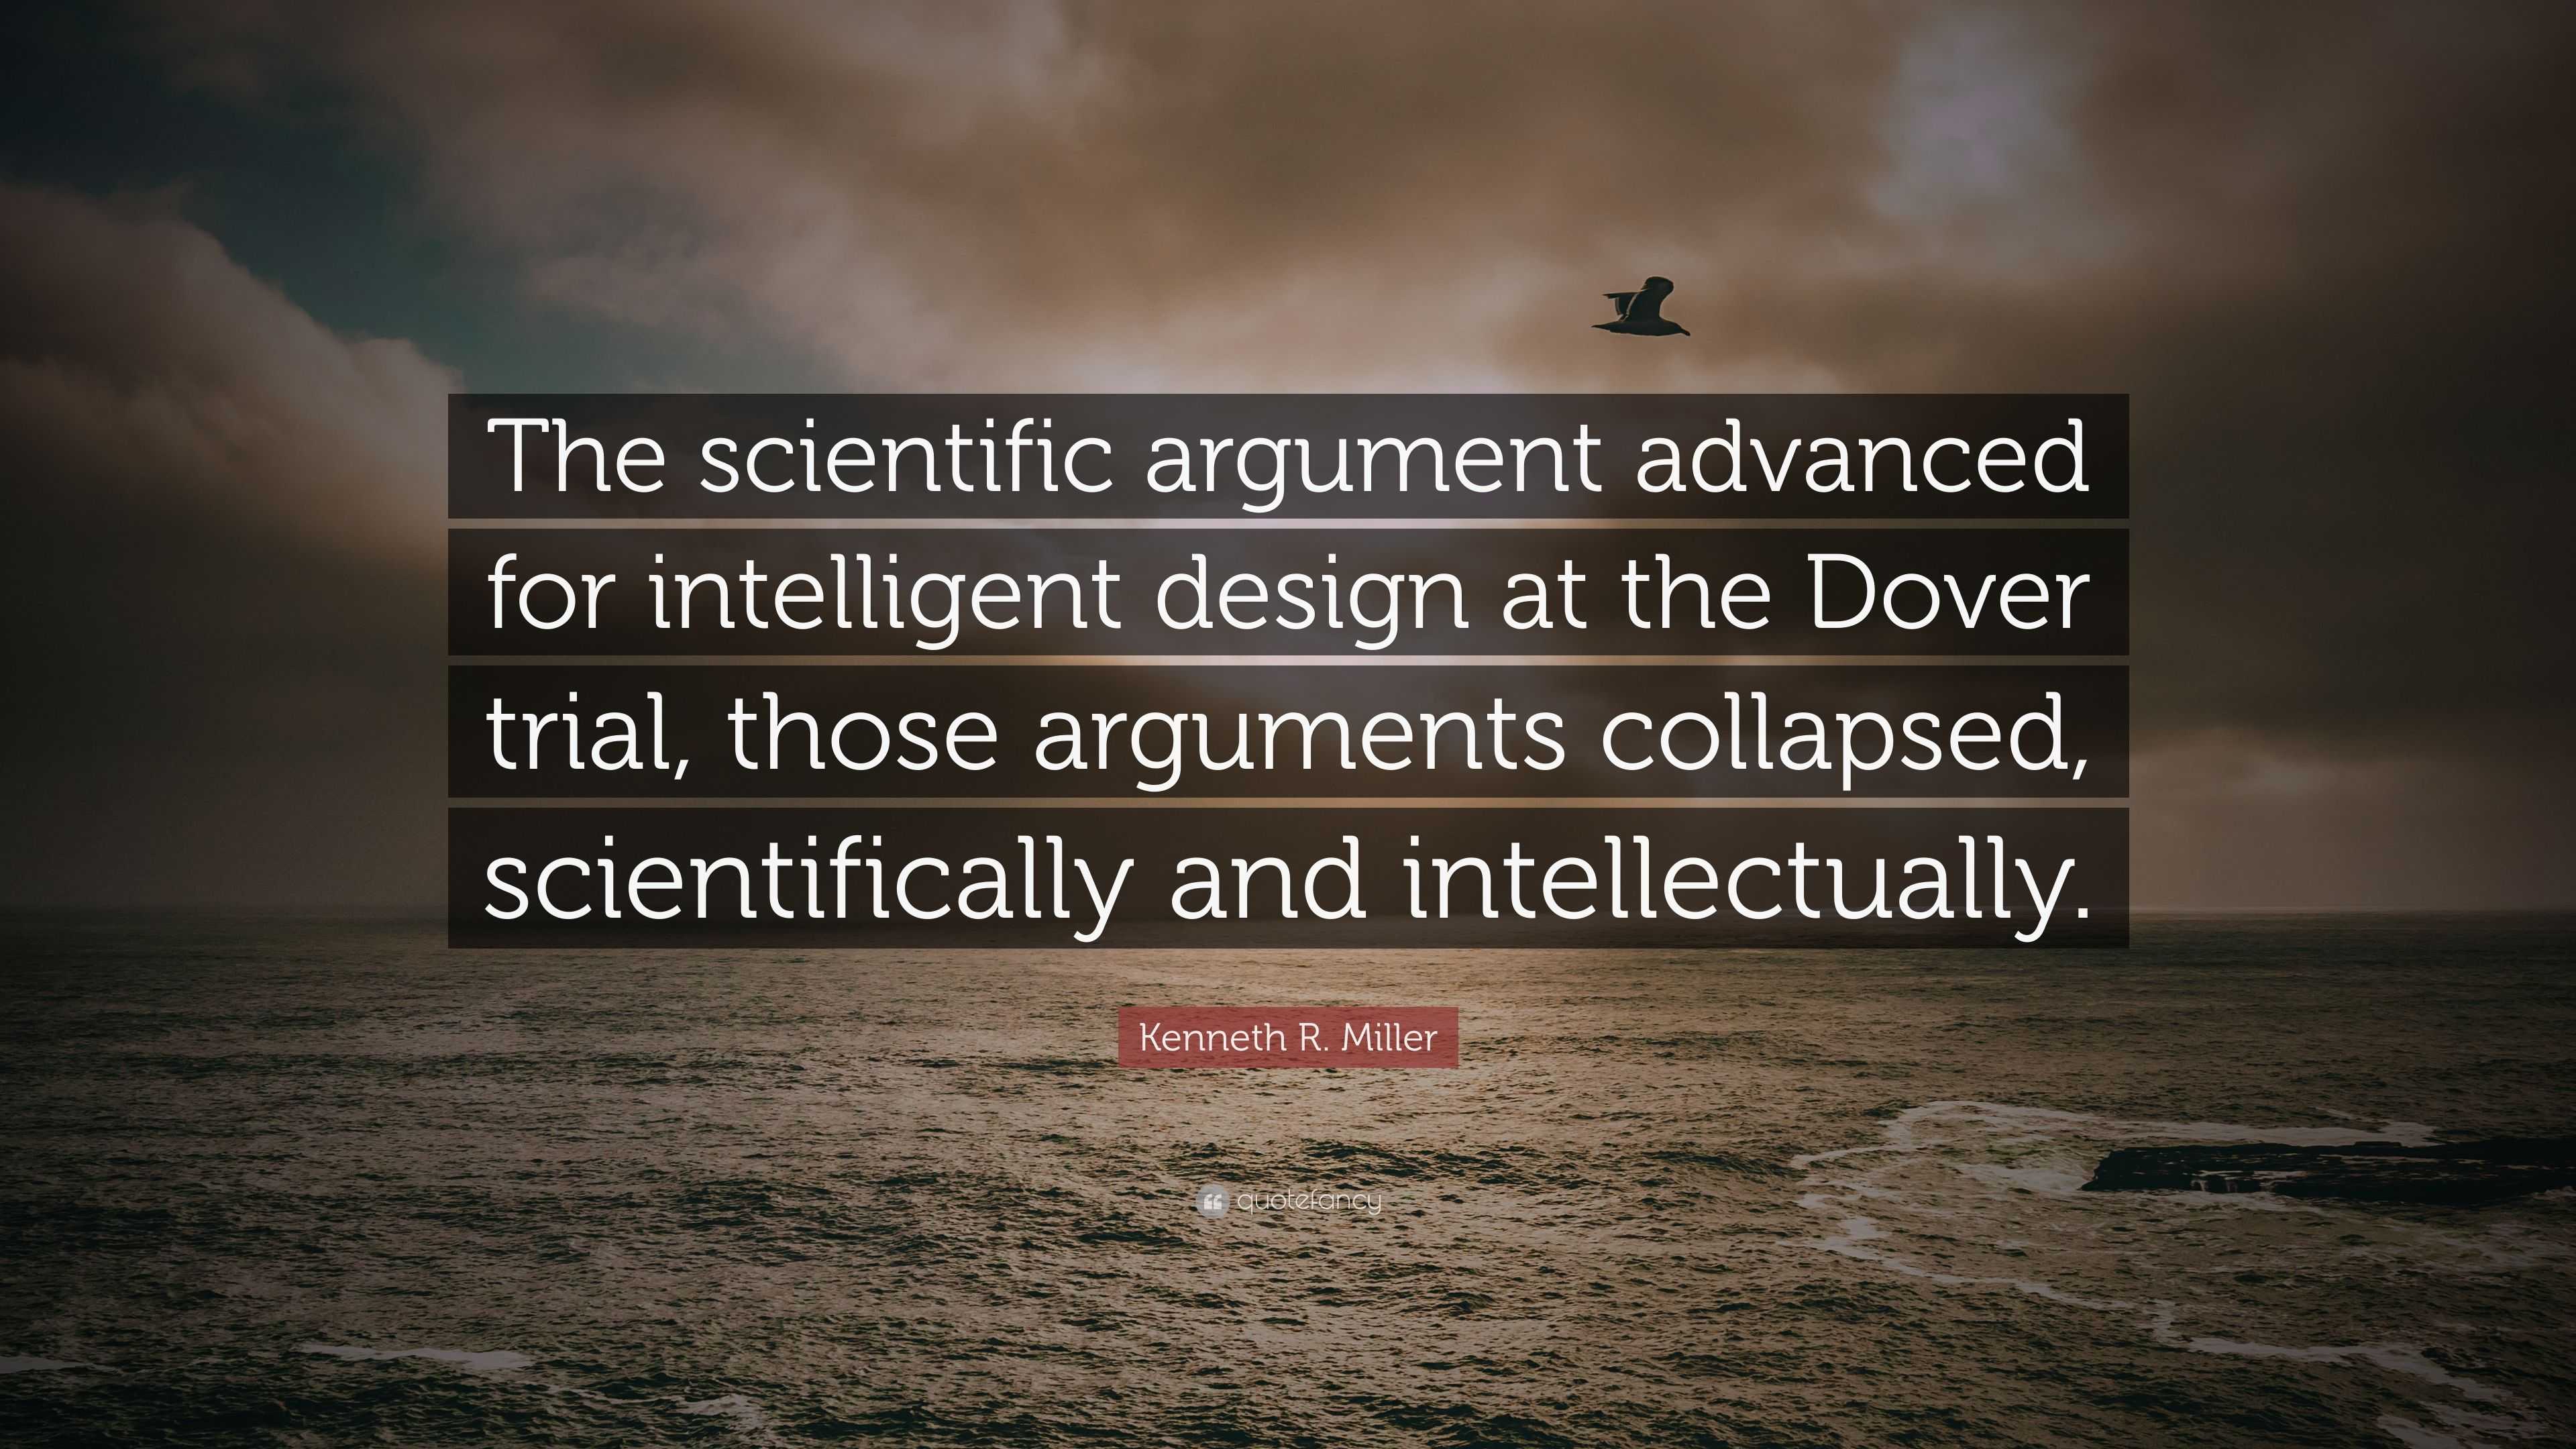 Kenneth R Miller Quote The Scientific Argument Advanced For Intelligent Design At The Dover Trial Those Arguments Collapsed Scientifically An 7 Wallpapers Quotefancy,Religious T Shirt Design Ideas